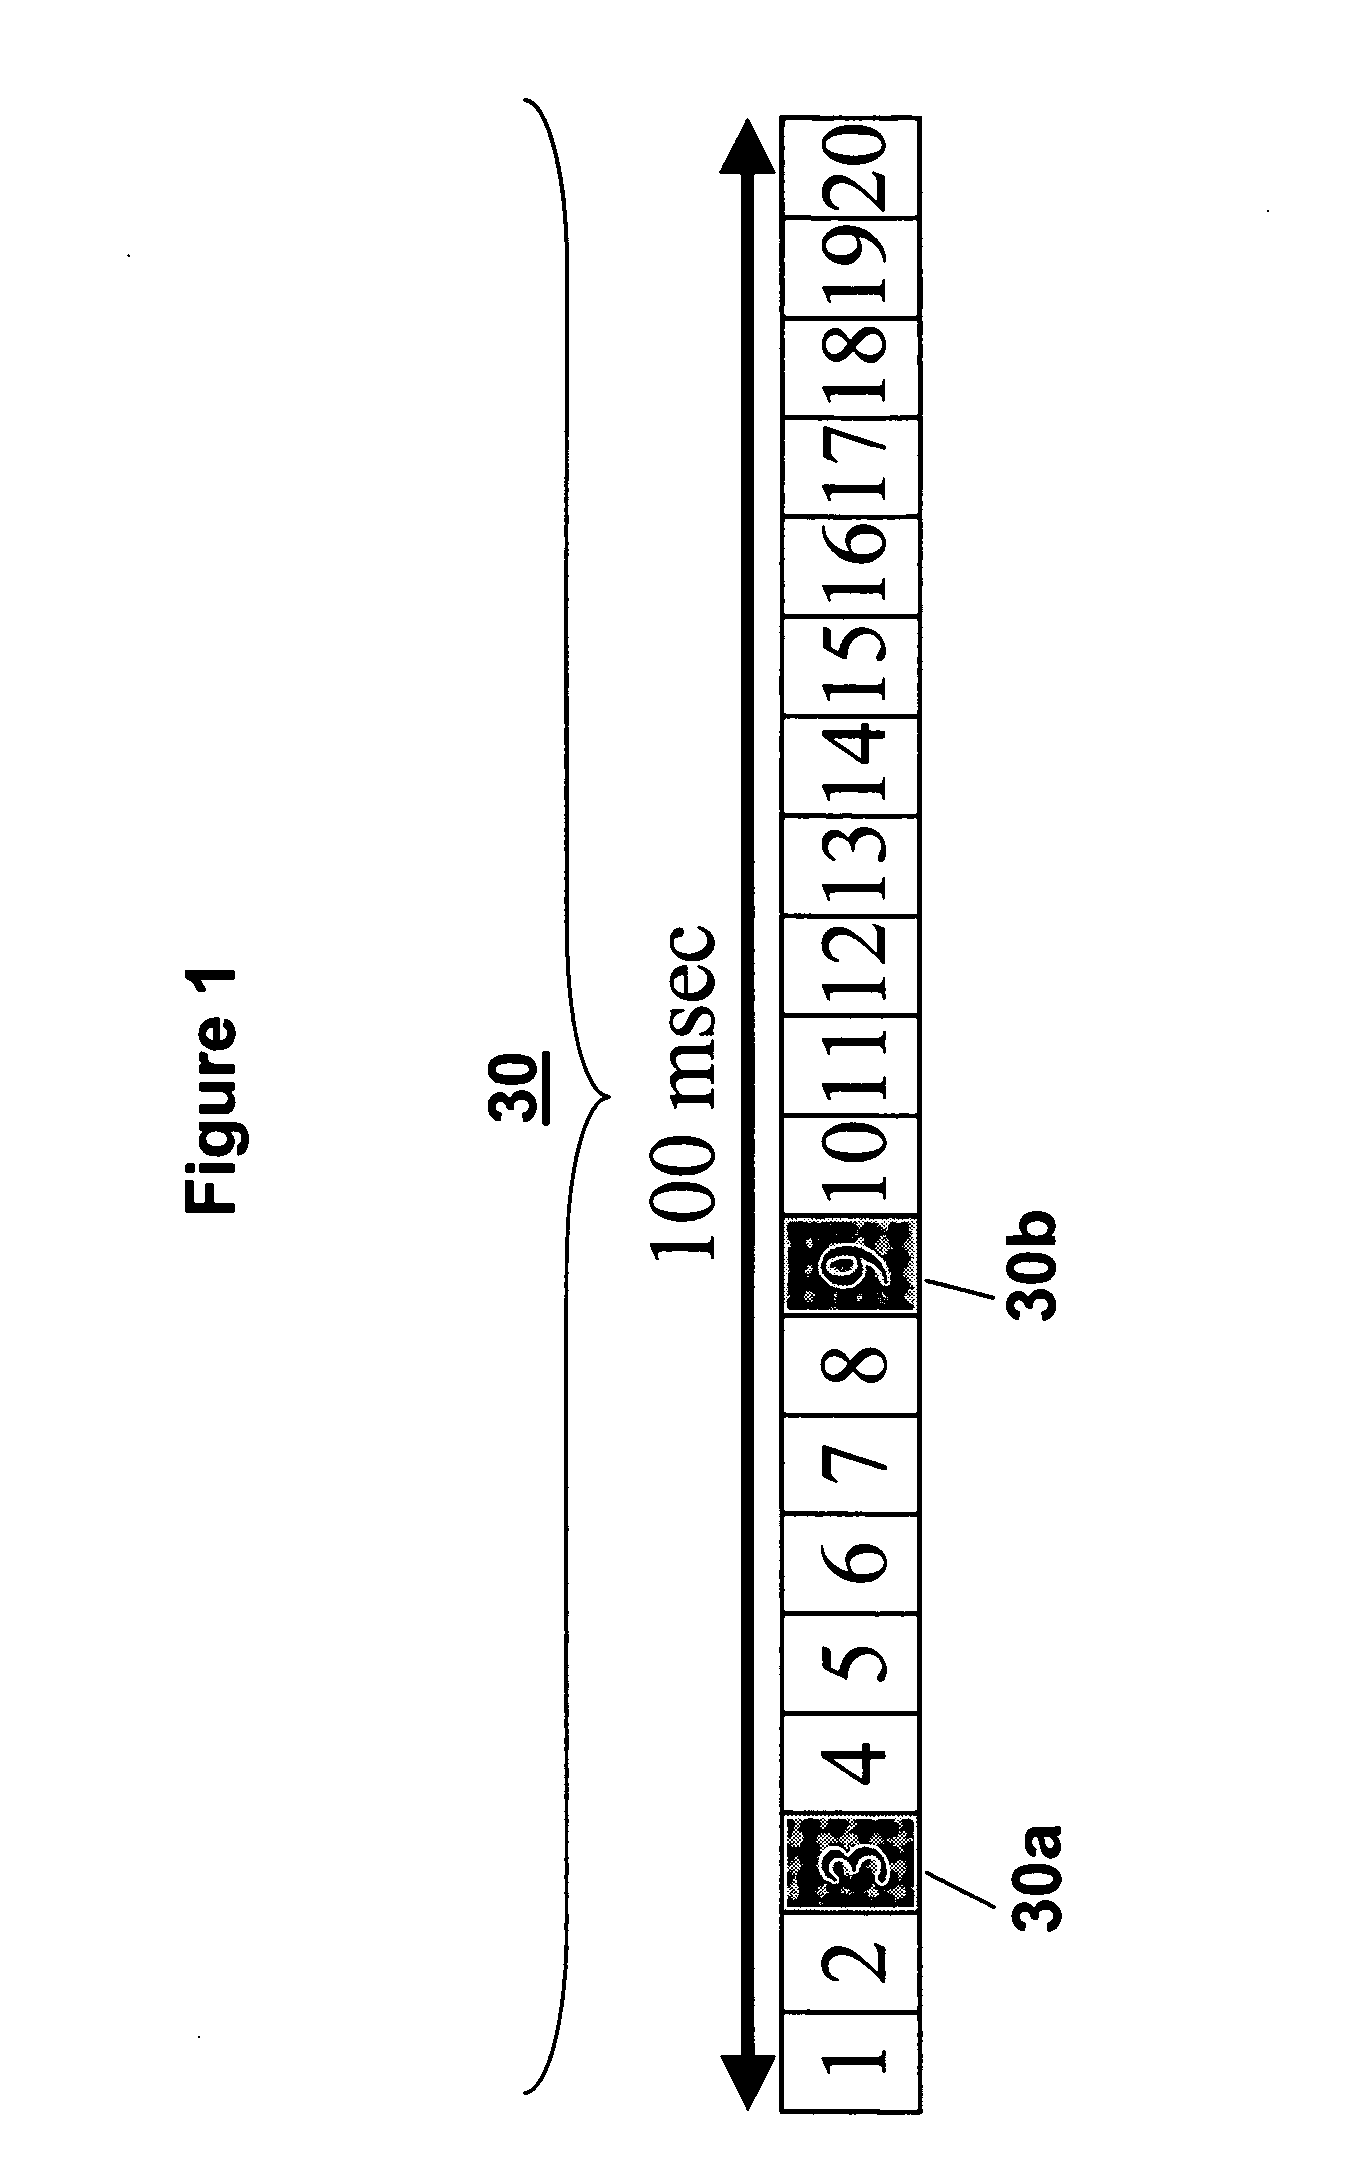 Method of forming directional wireless networks using in-band channels